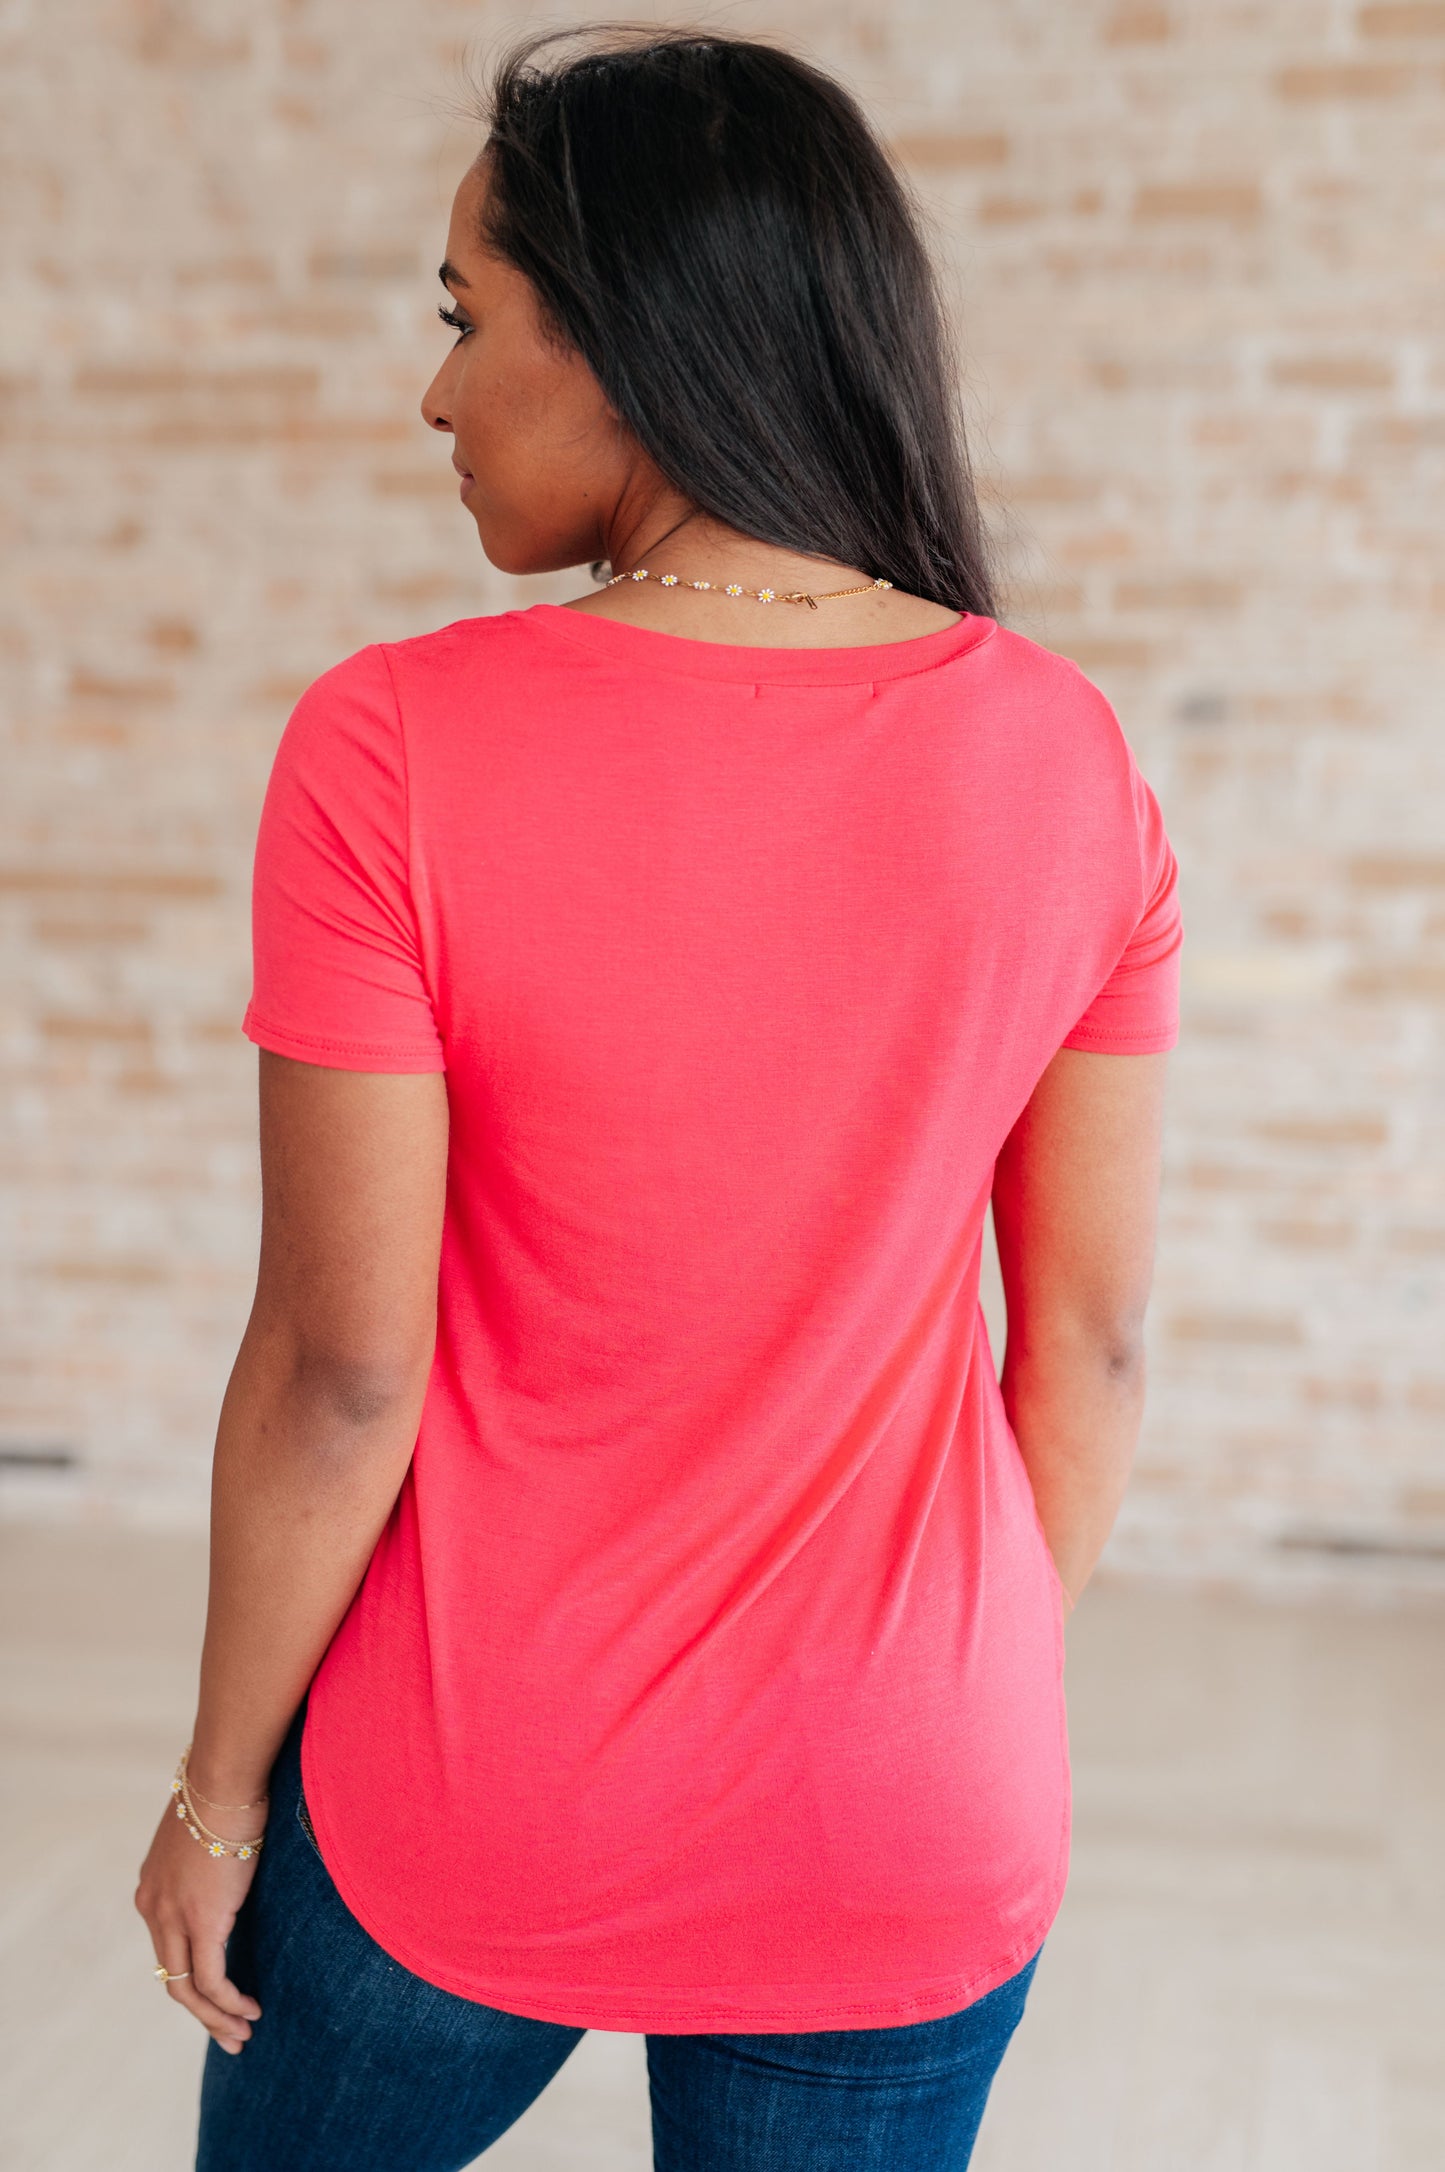 Back to the Basics Top in Watermelon